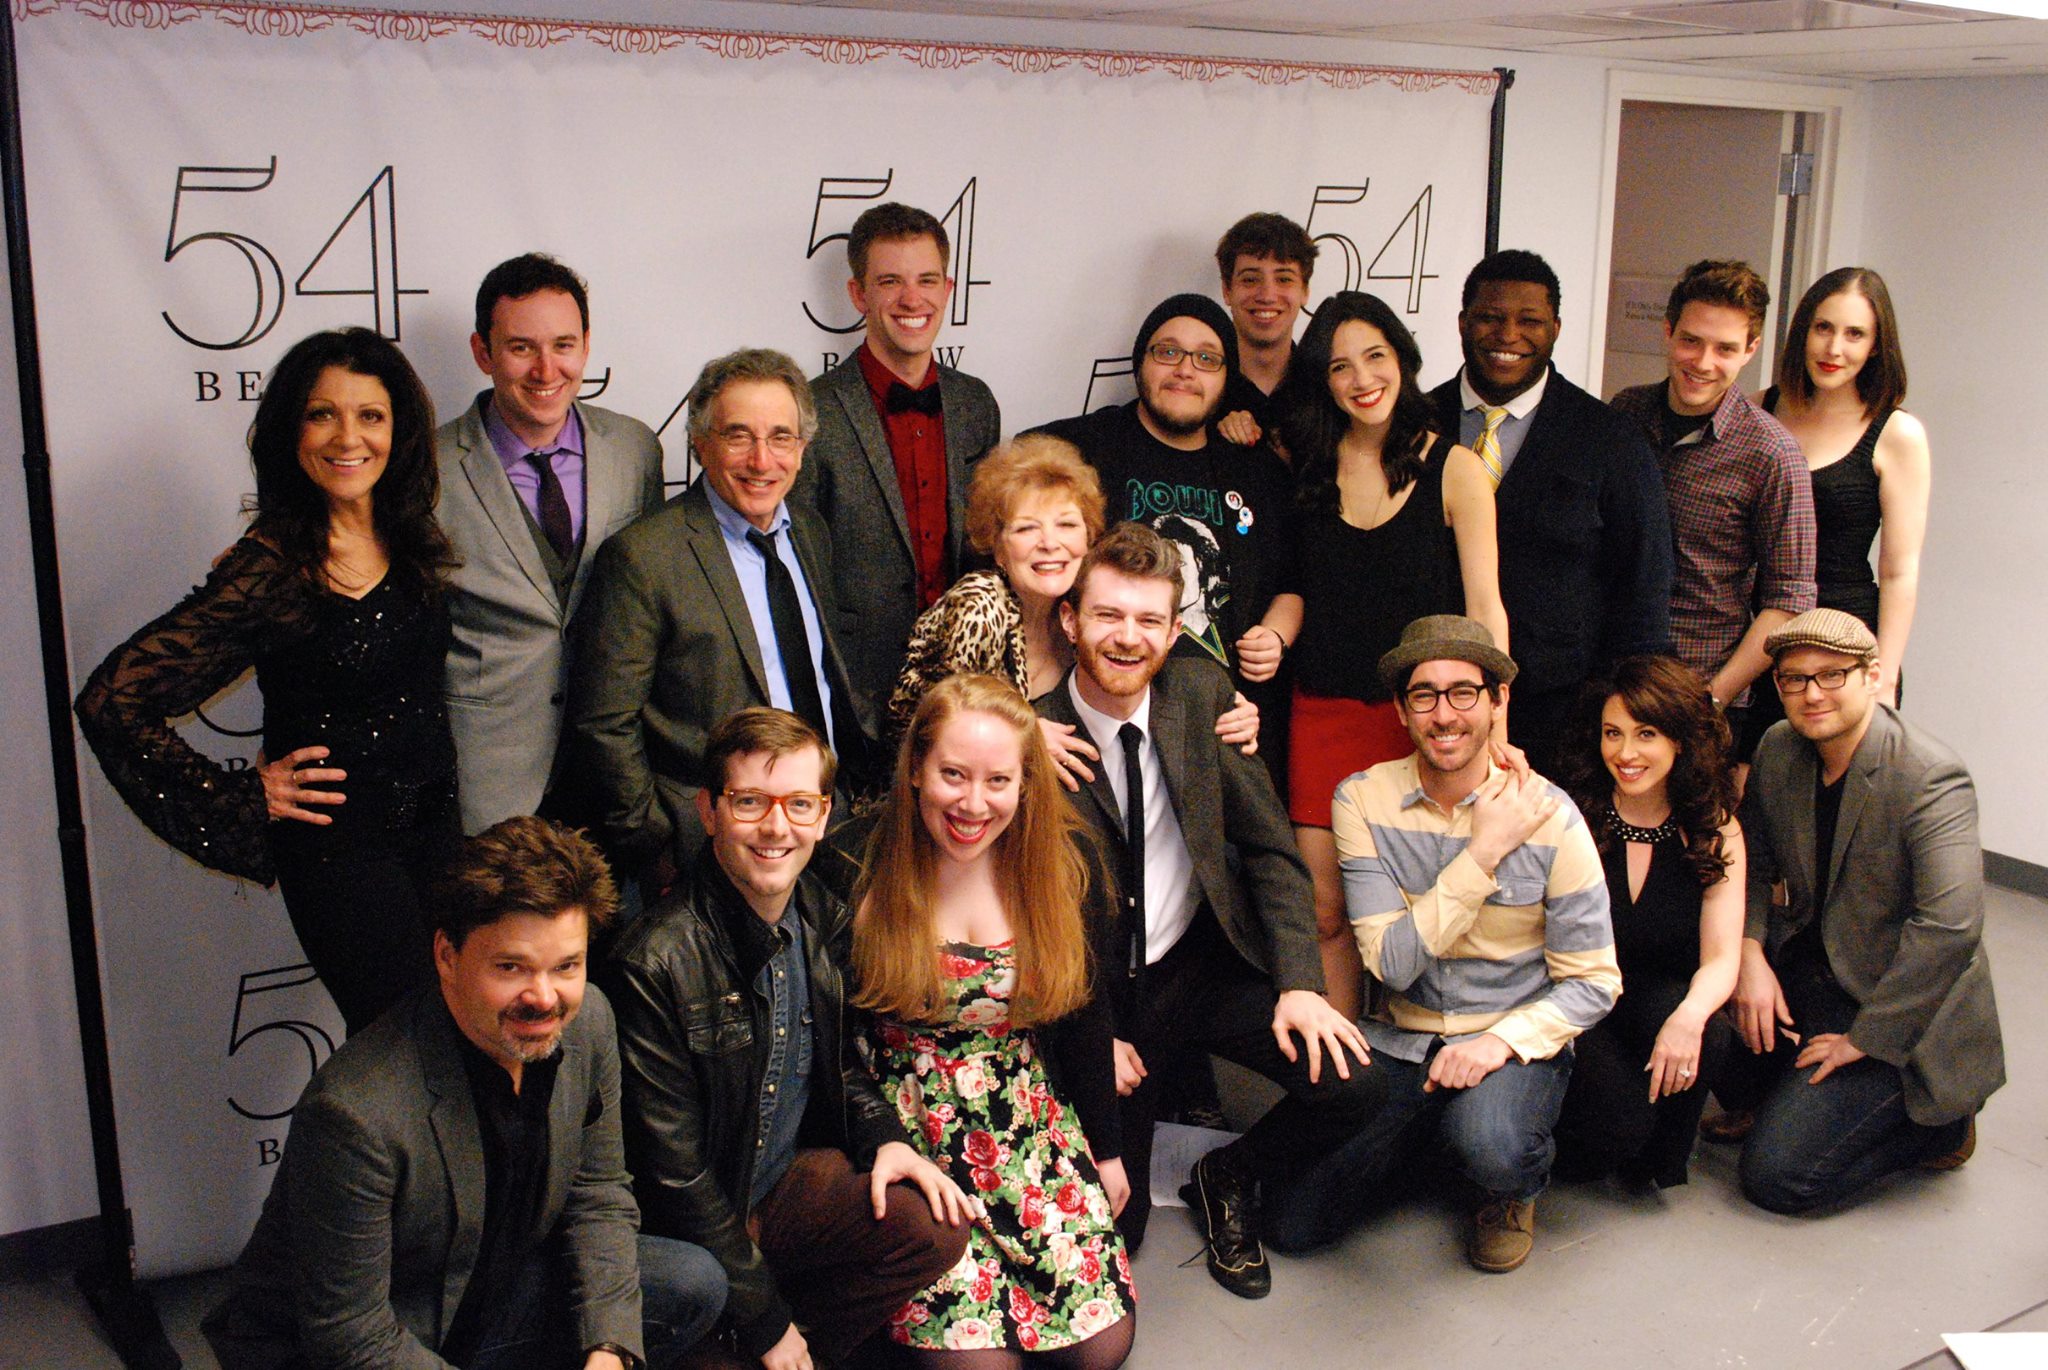 Jennifer Tepper With the cast of "If It Only Even Runs A Minute 12" at 54 Below